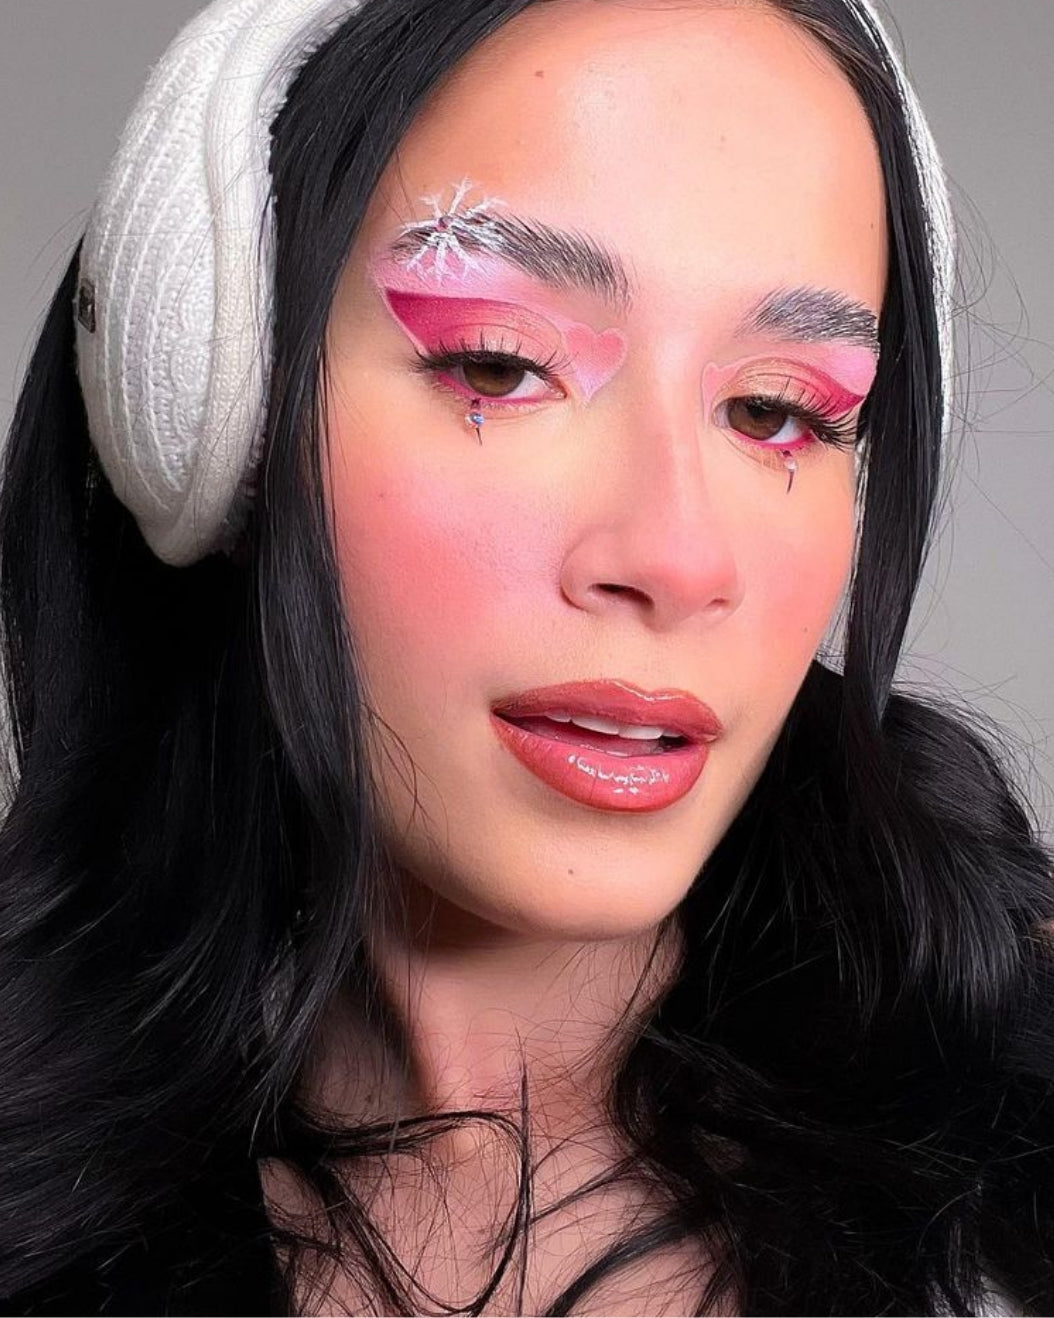 Portrait of a woman wearing pink snowflake eye makeup to use as holiday makeup inspiration